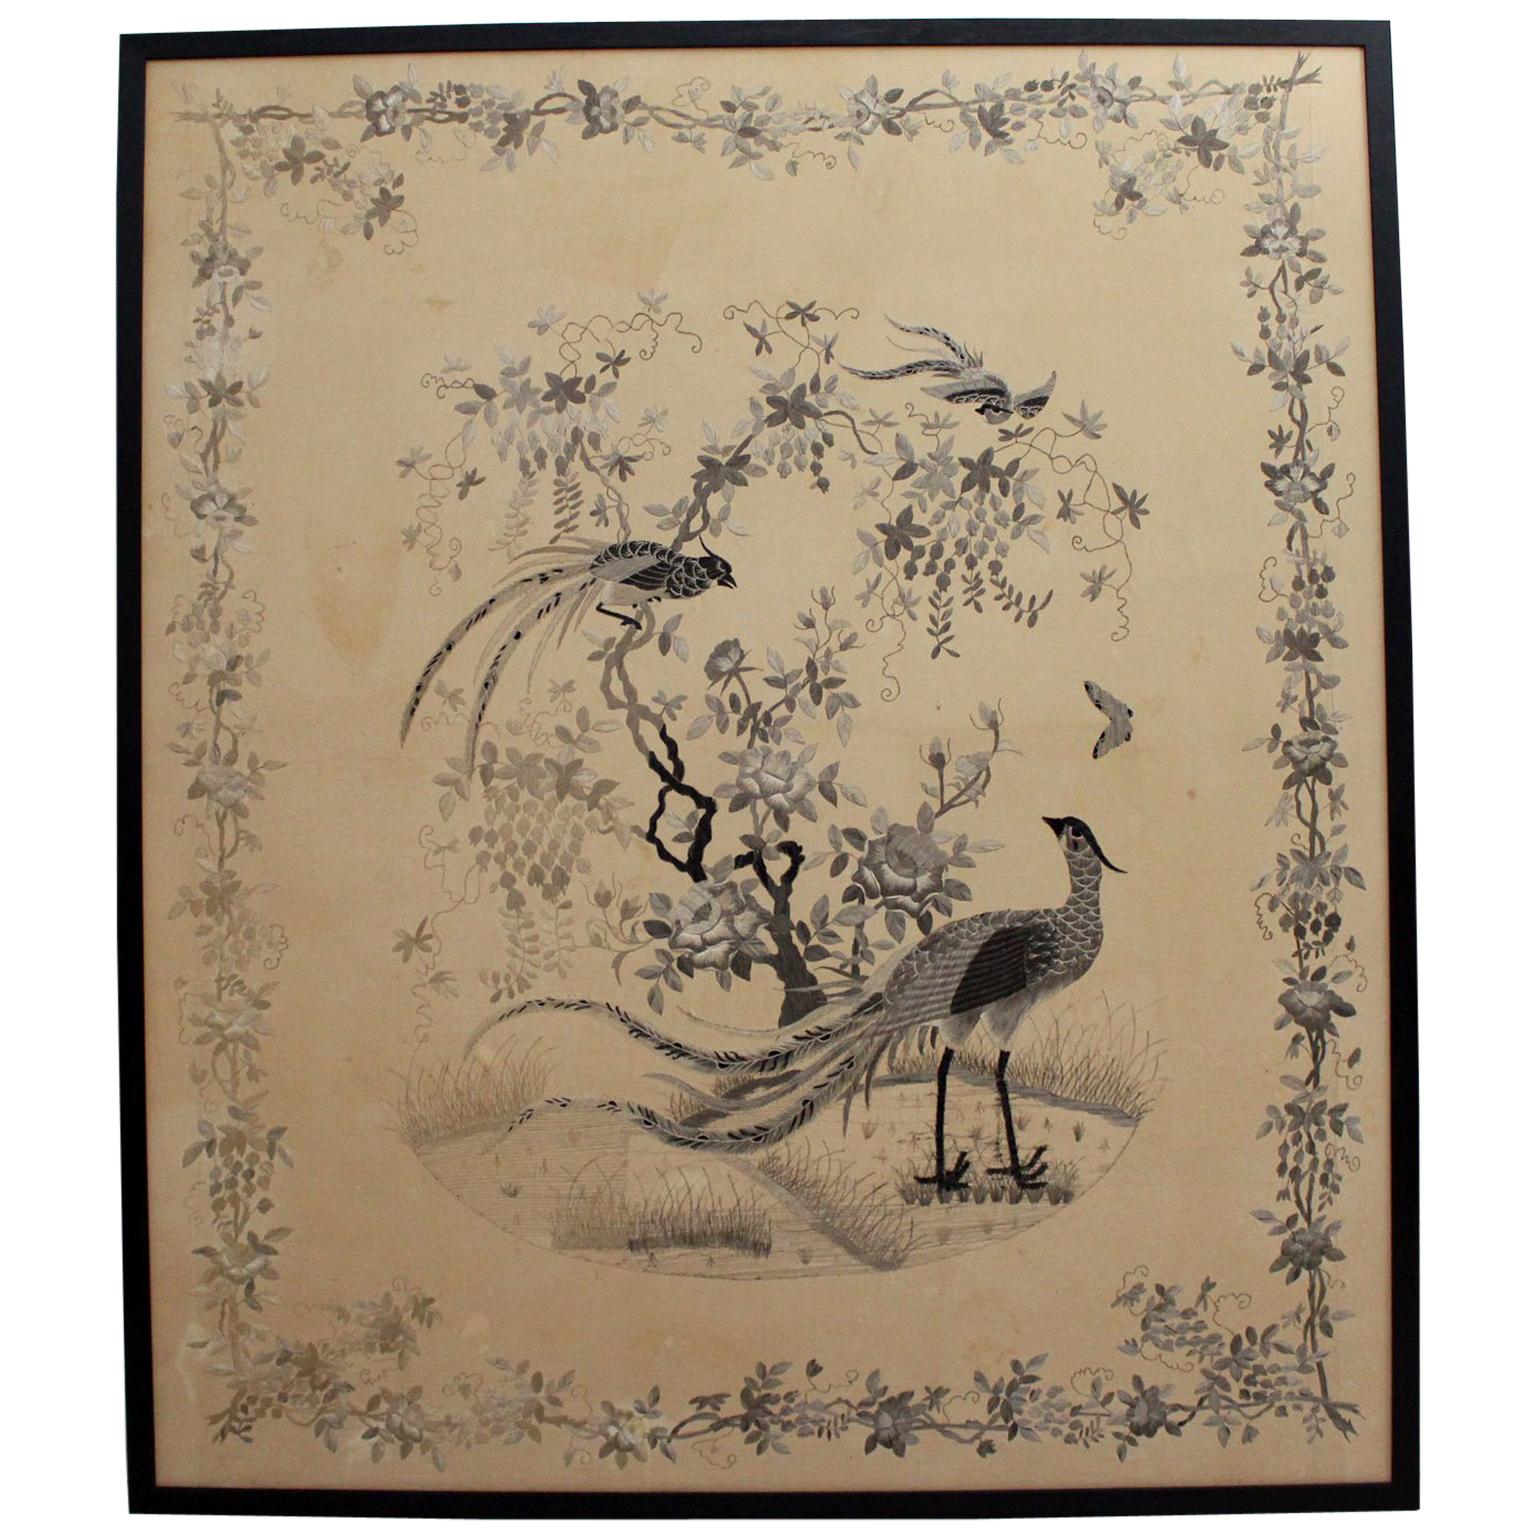 Very Large Antique Monochrome Chinese Hand Embroidery in Black Frame